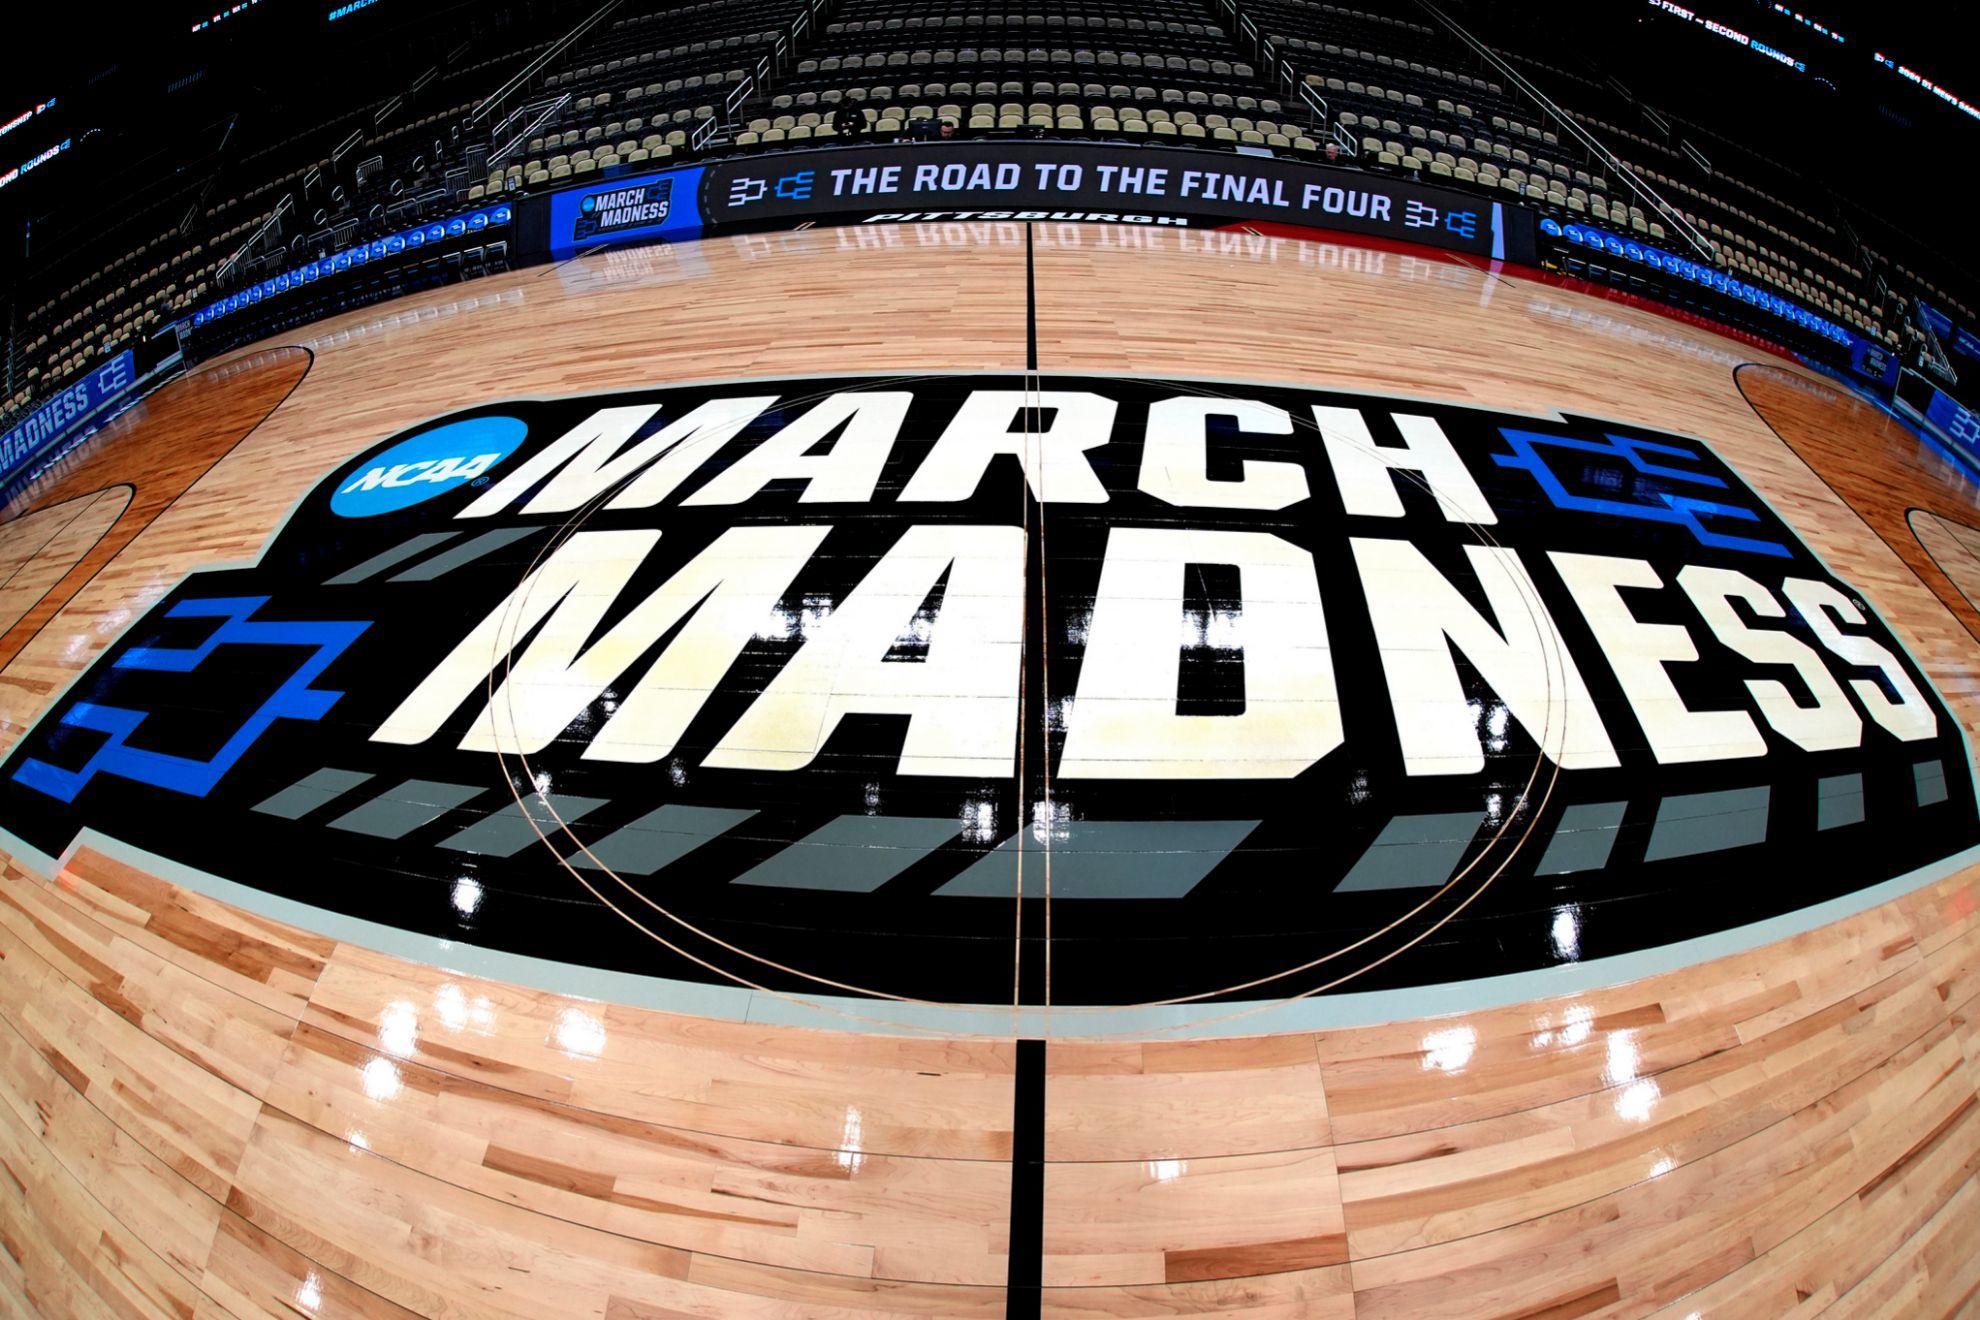 How to watch the mens March Madness Final Four games? Channel and streaming service